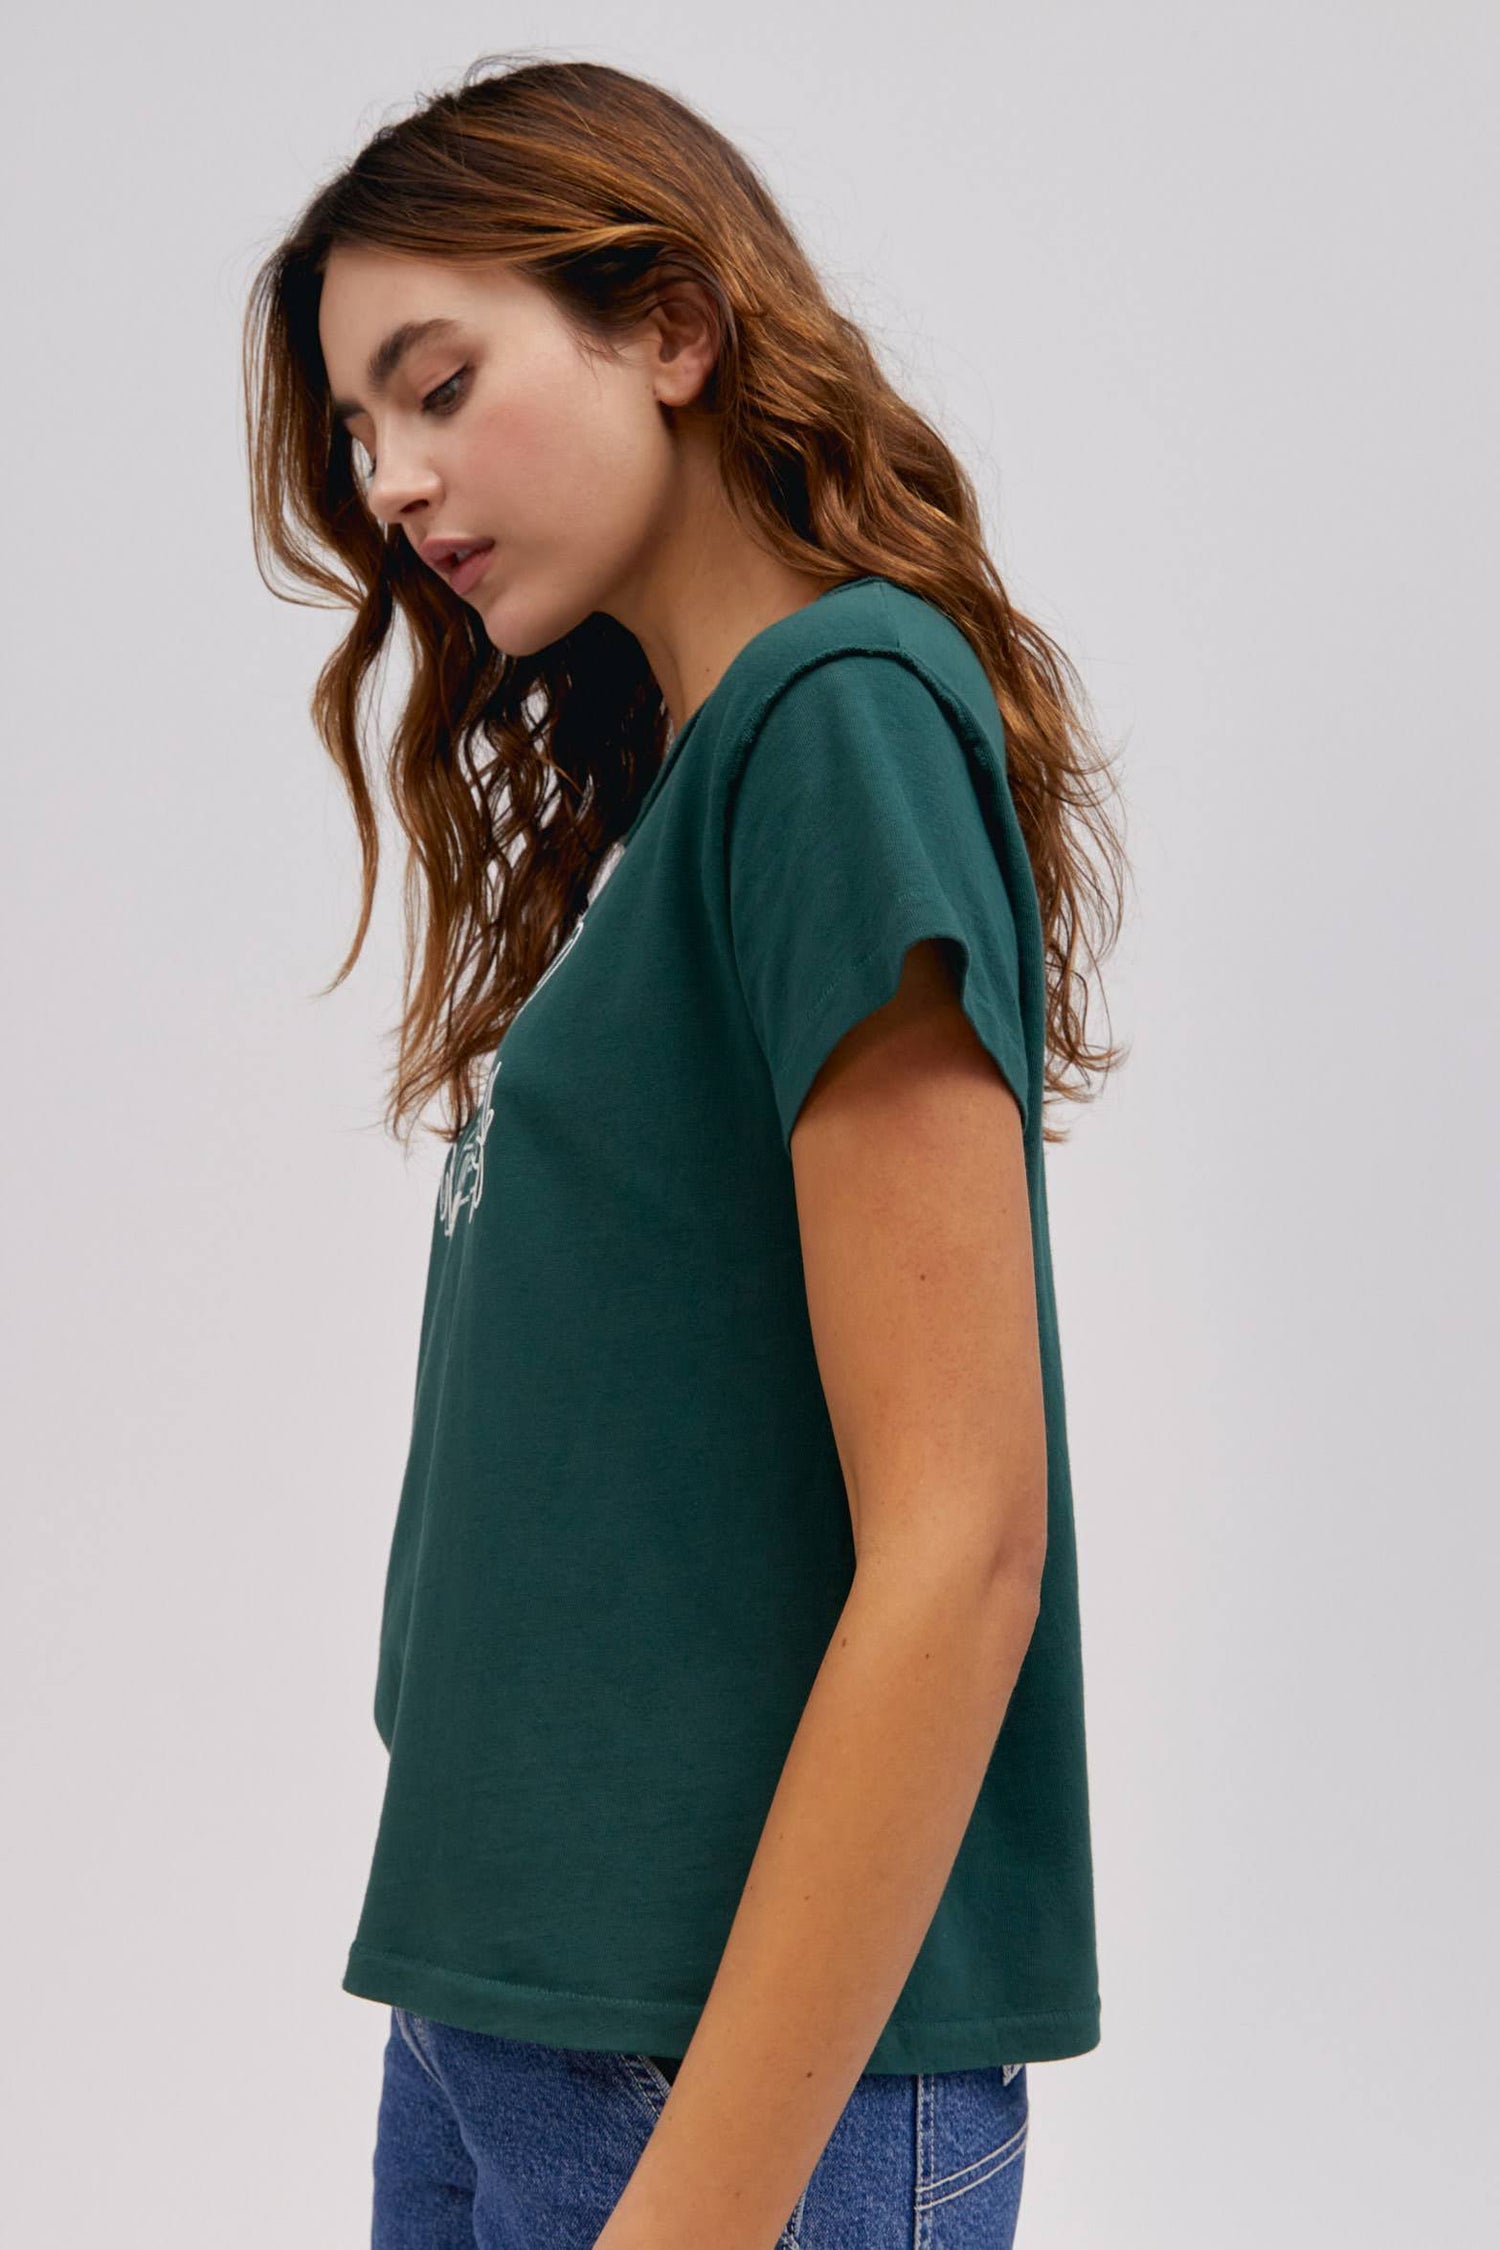 A curly-haired model featuring a pine reverse gf tee designed with the original Lee workwear logo reimagined into an exclusive, co-branded graphic with layered doodles in puff ink.